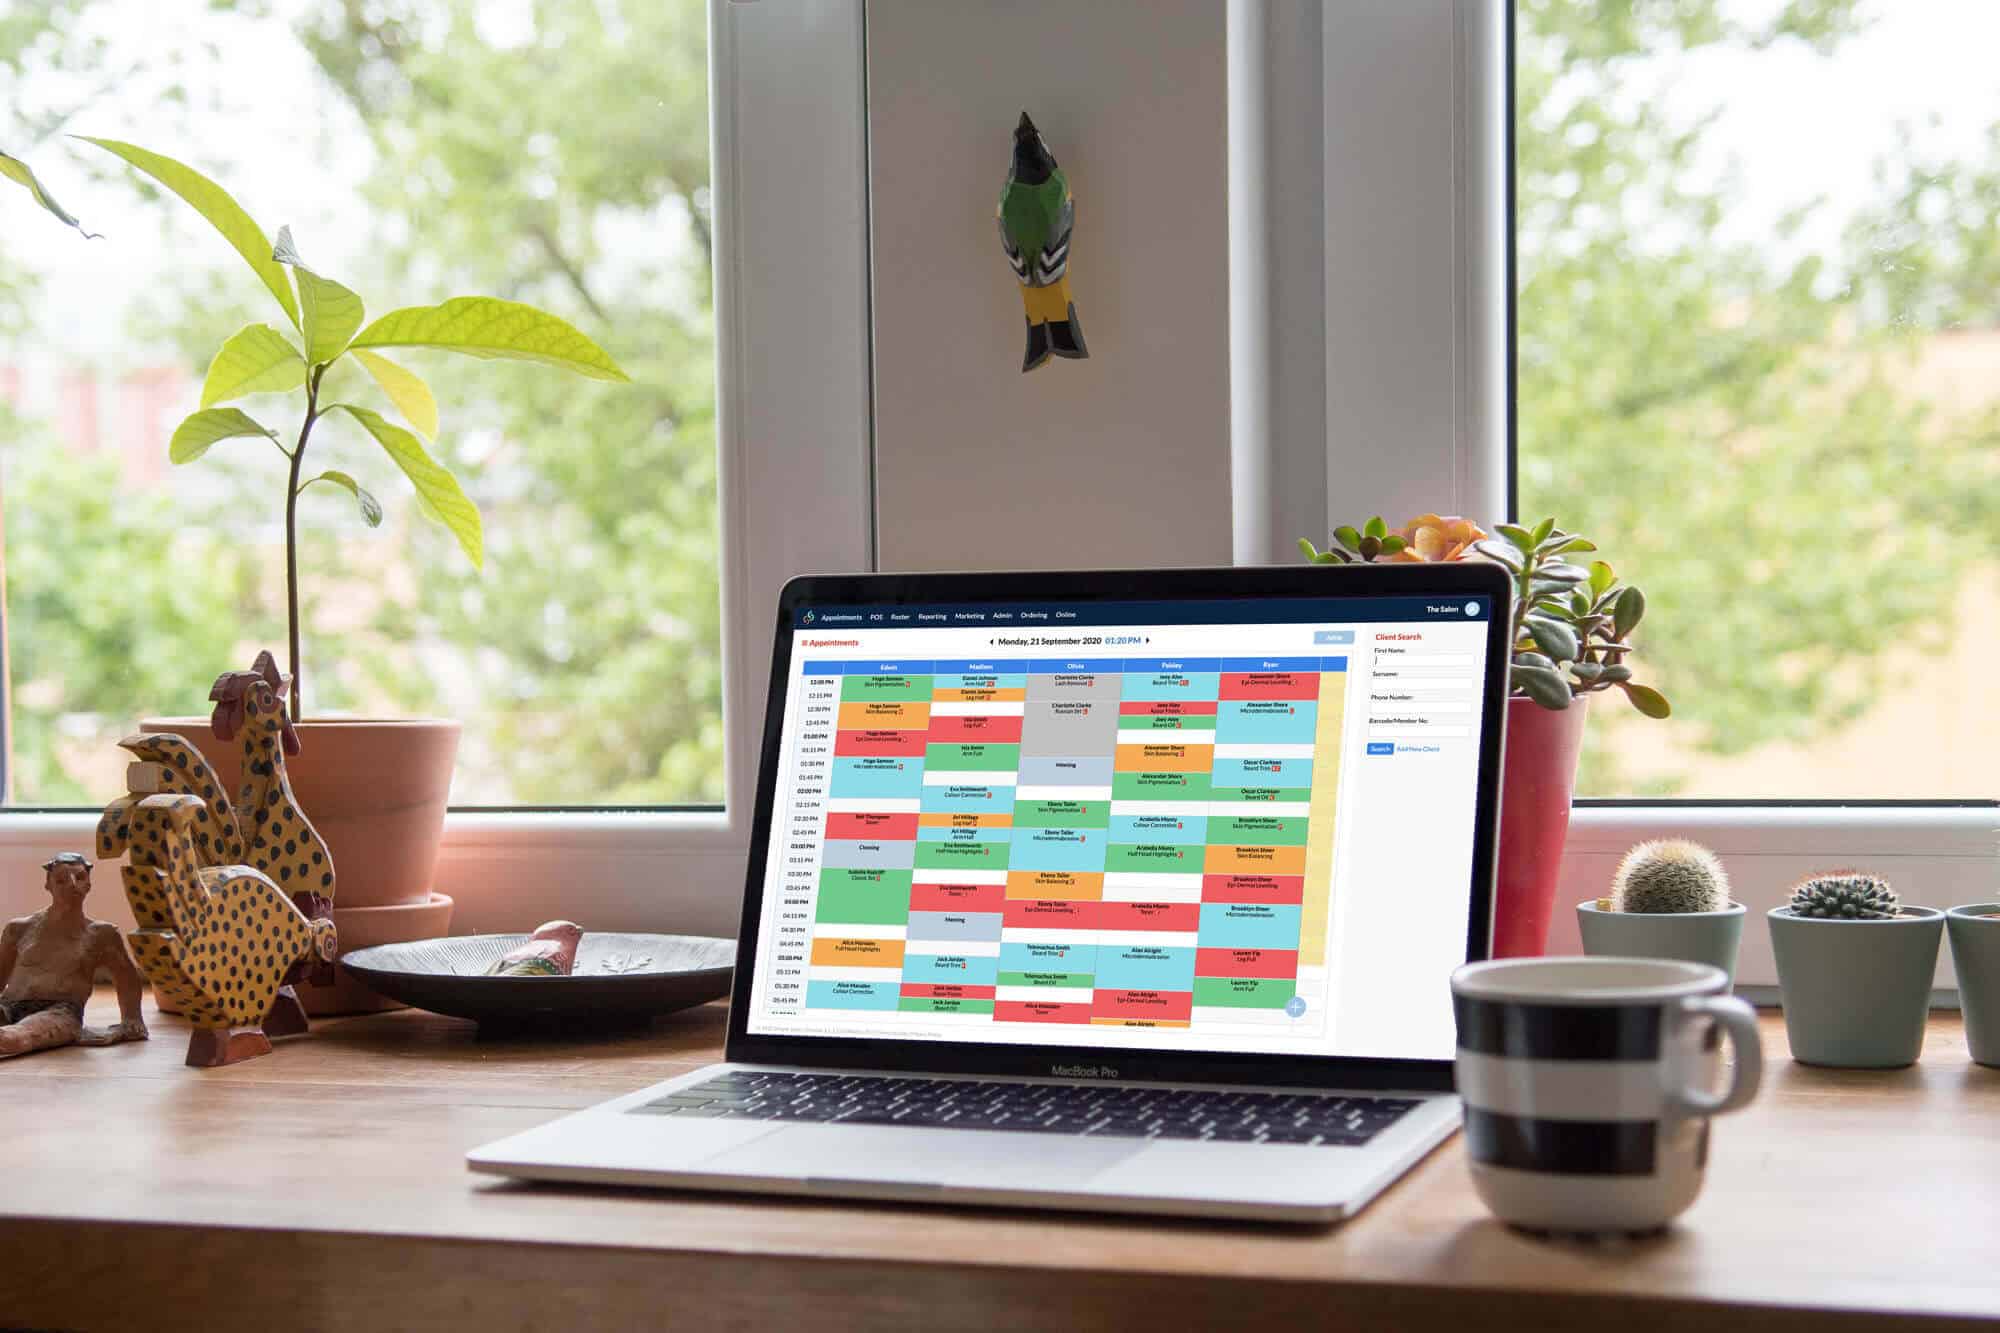 An open laptop displaying a colorful appointment calendar on its screen, situated on a home office desk surrounded by indoor plants, illustrating the convenience and organization provided by salon booking software.